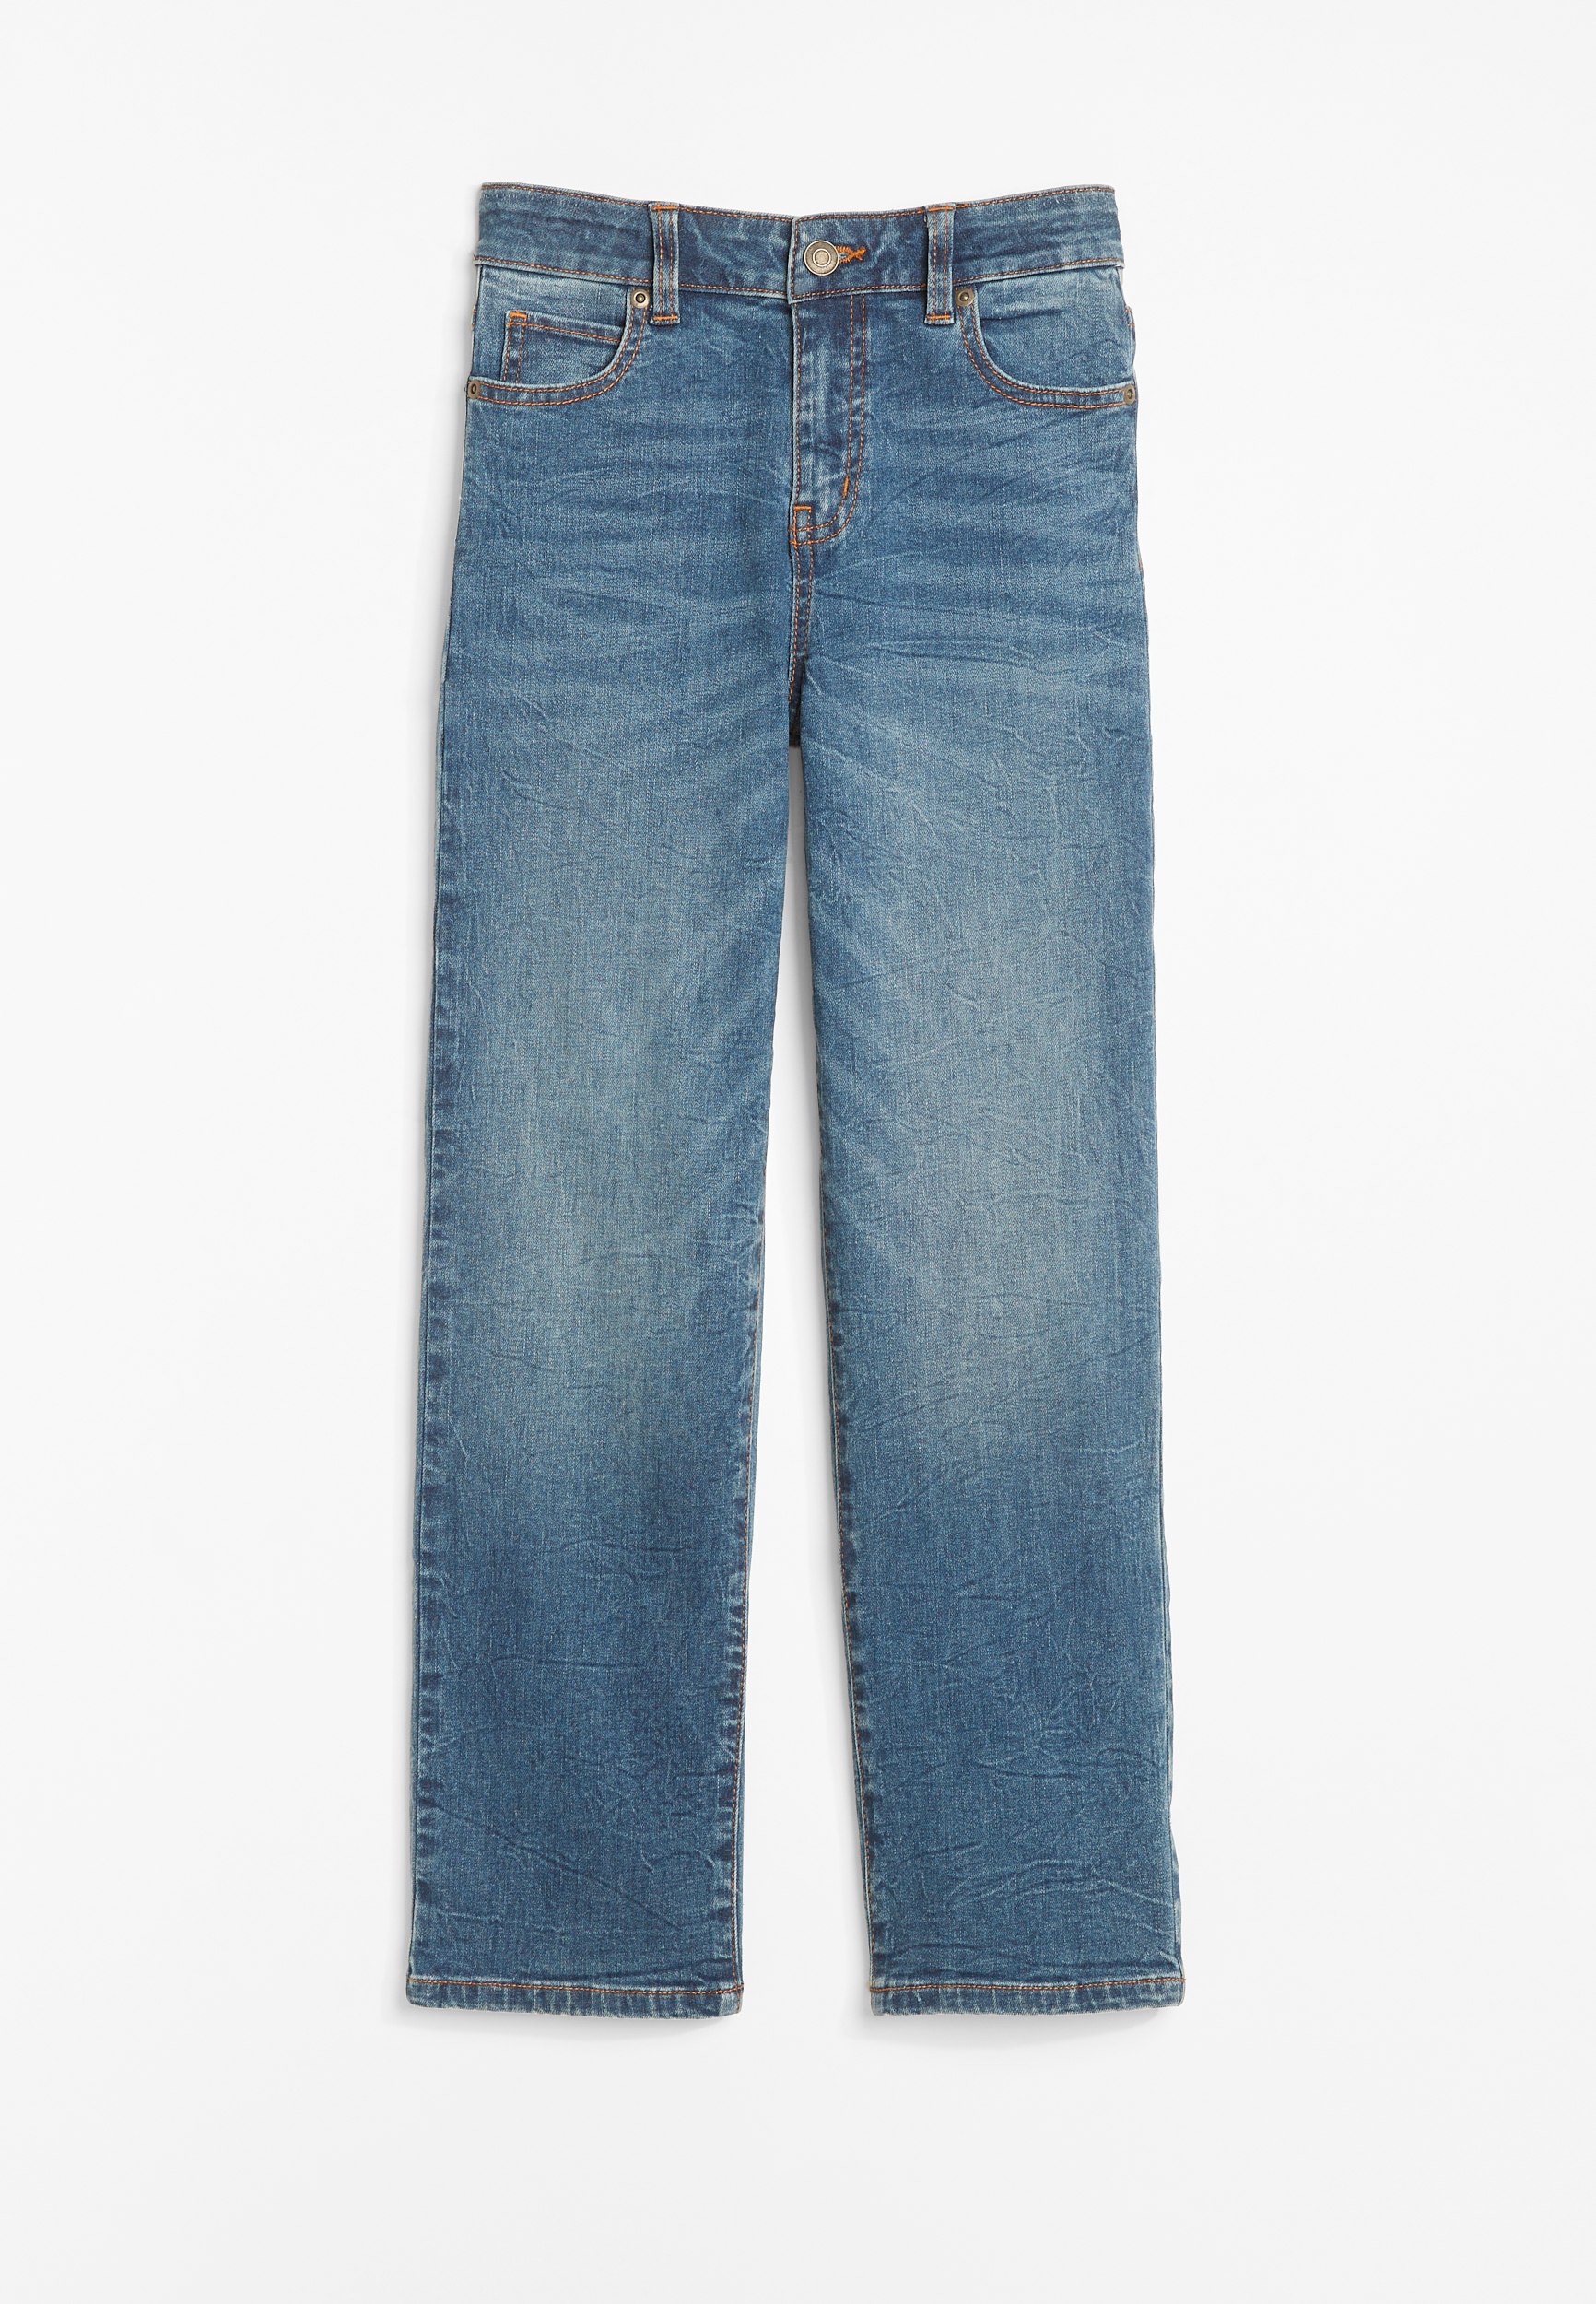 Girls Jeans | Ages maurices 8-12 